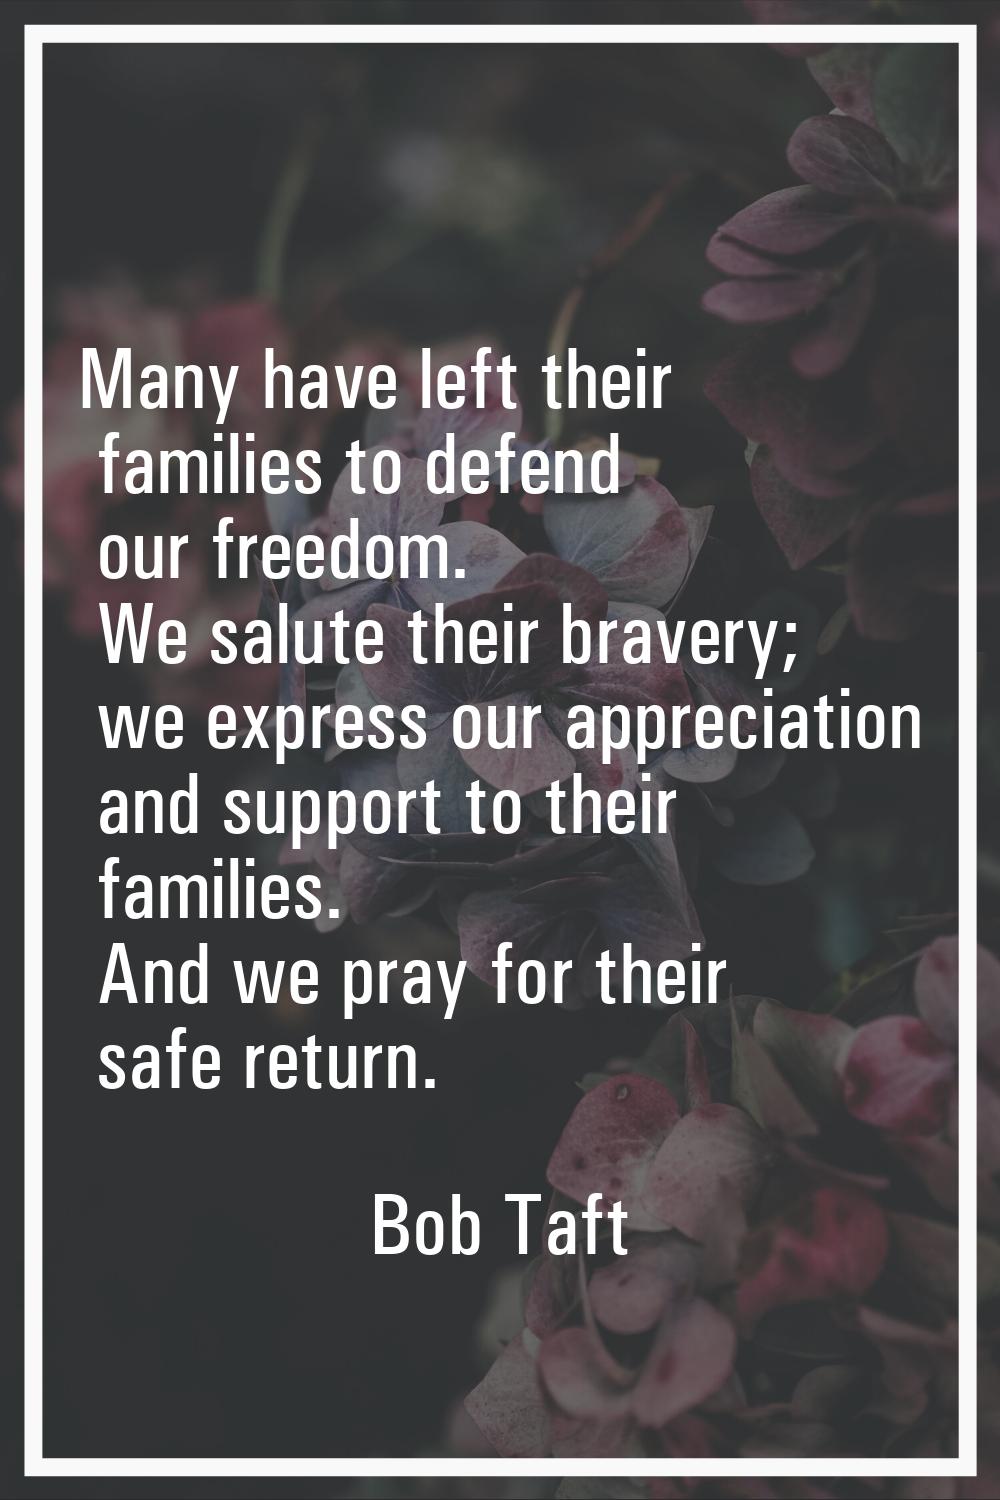 Many have left their families to defend our freedom. We salute their bravery; we express our apprec